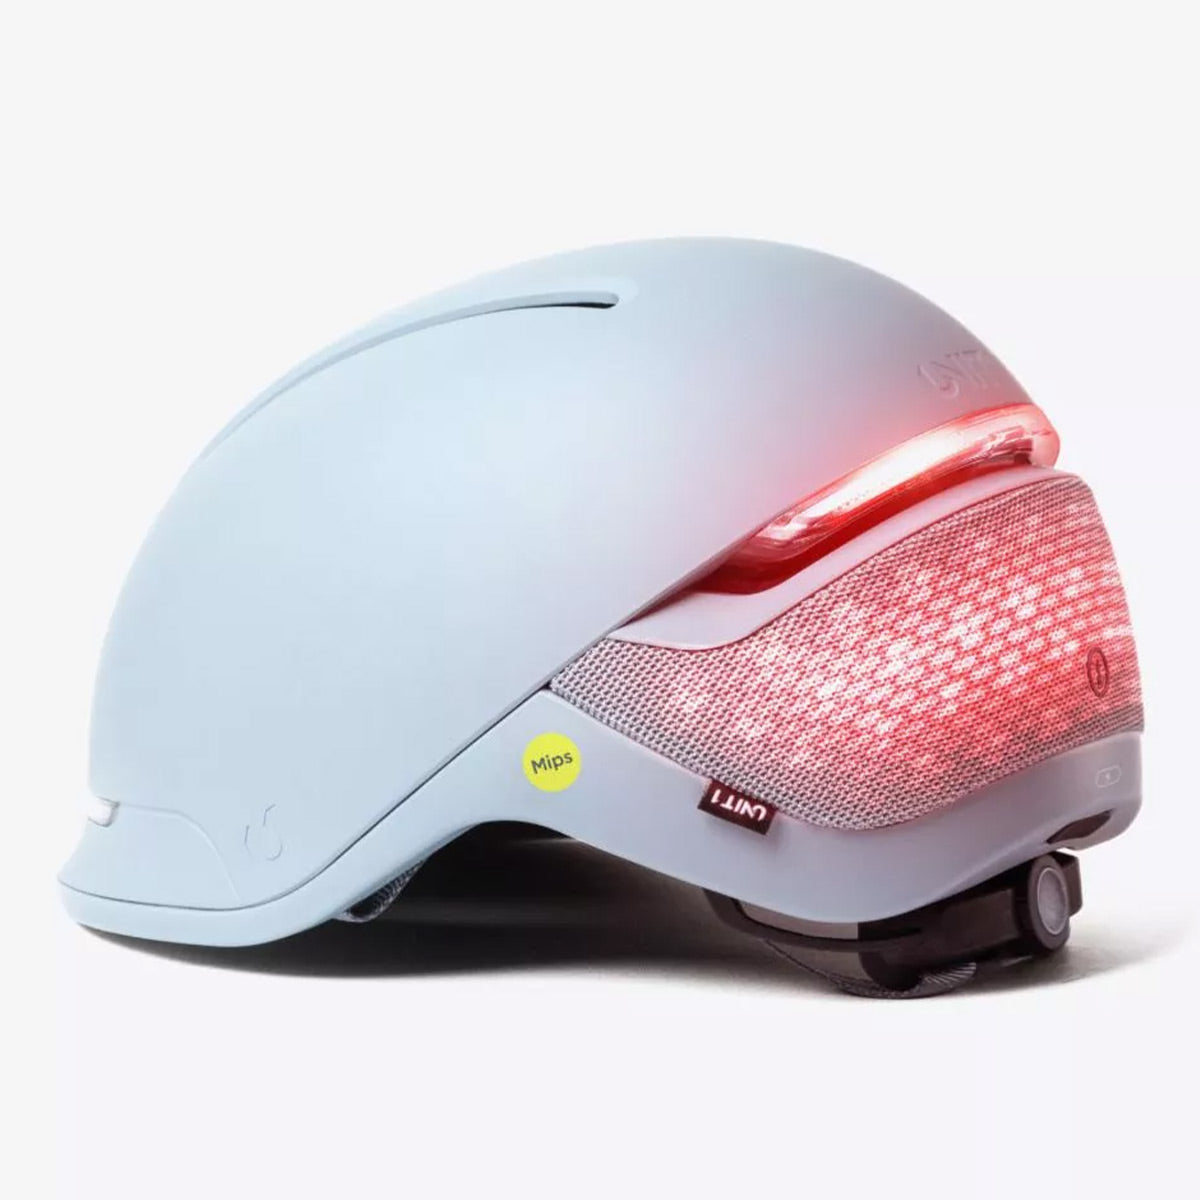 Unit 1 Medium FARO Smart Helmet with IPX-6 Rating and Mips Impact Safety System (Stingray)